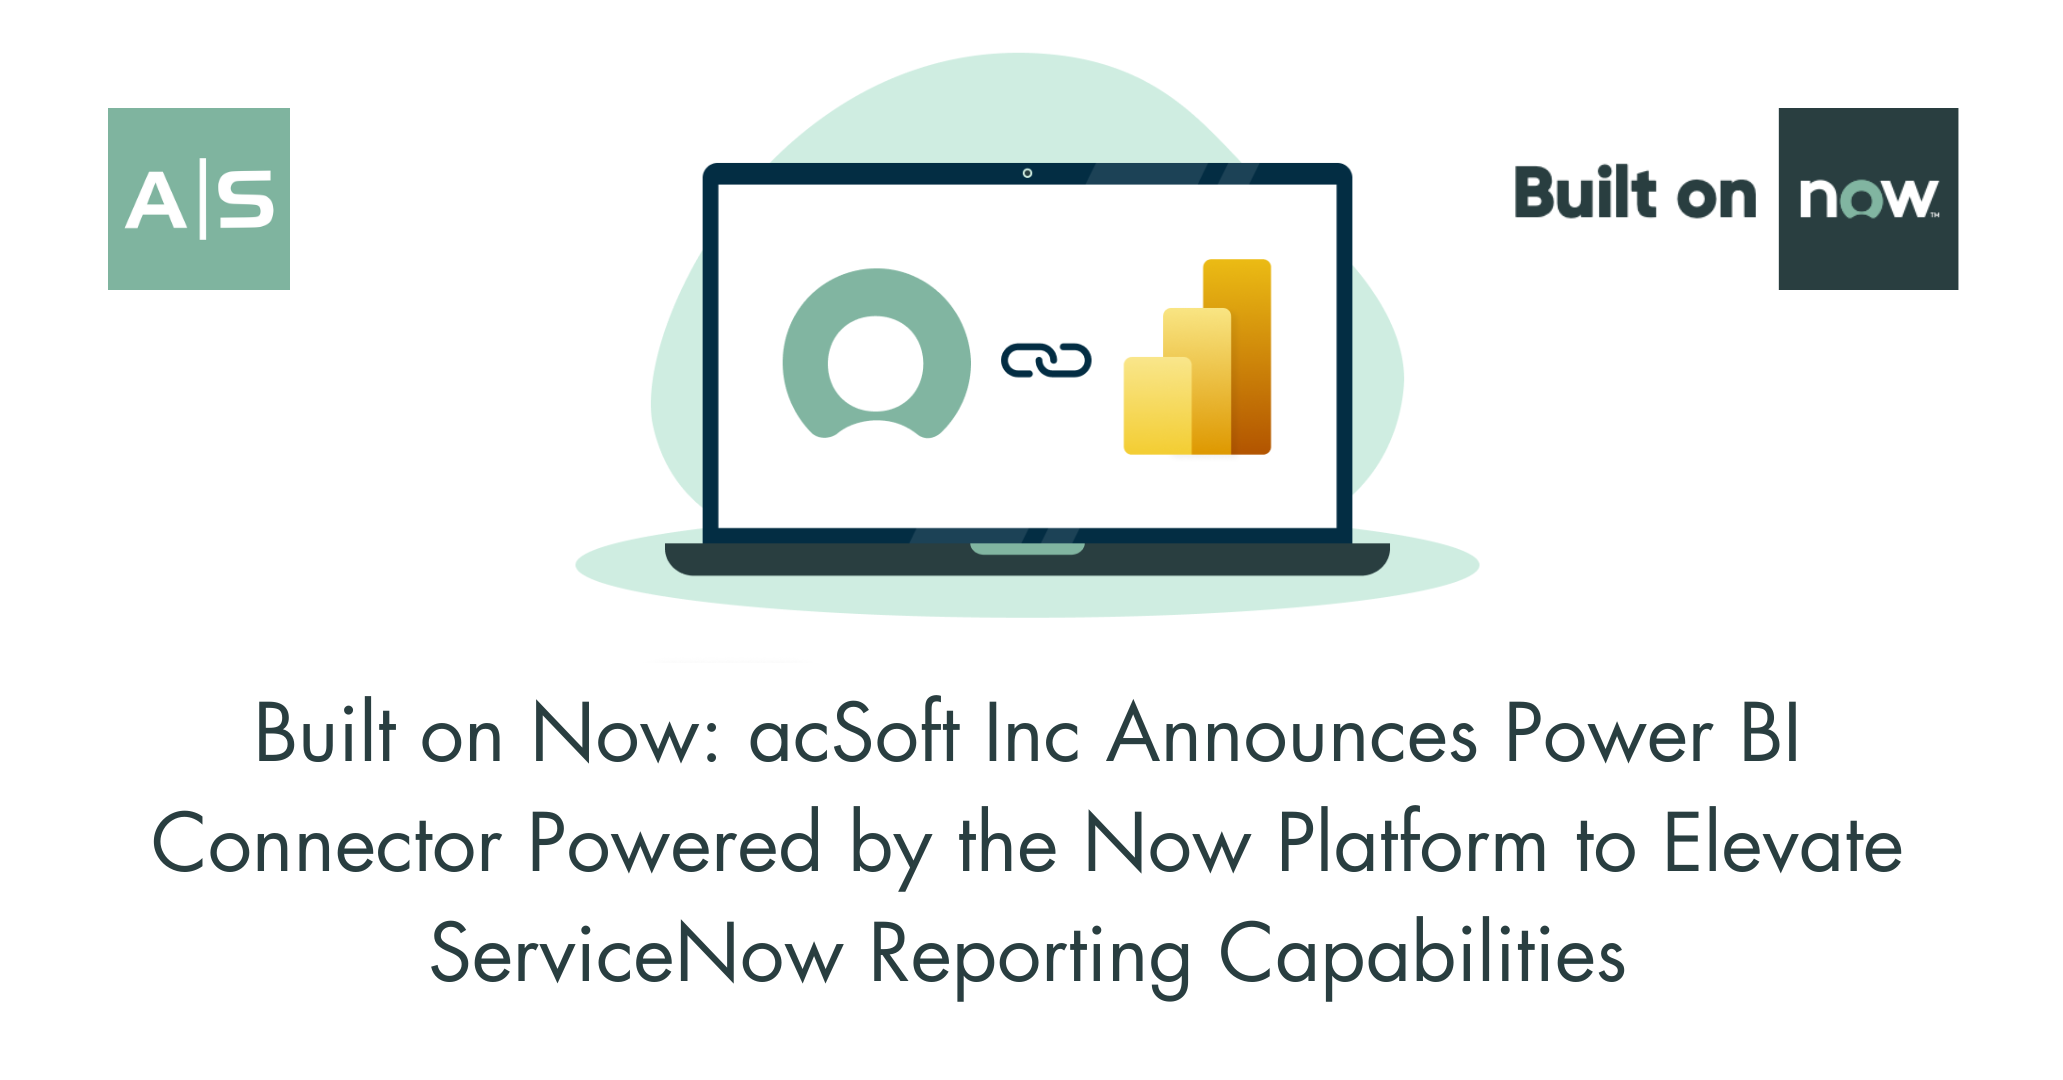 Built on Now: acSoft Inc Announces Power BI Connector Powered by the Now Platform to Elevate ServiceNow Reporting Capabilities